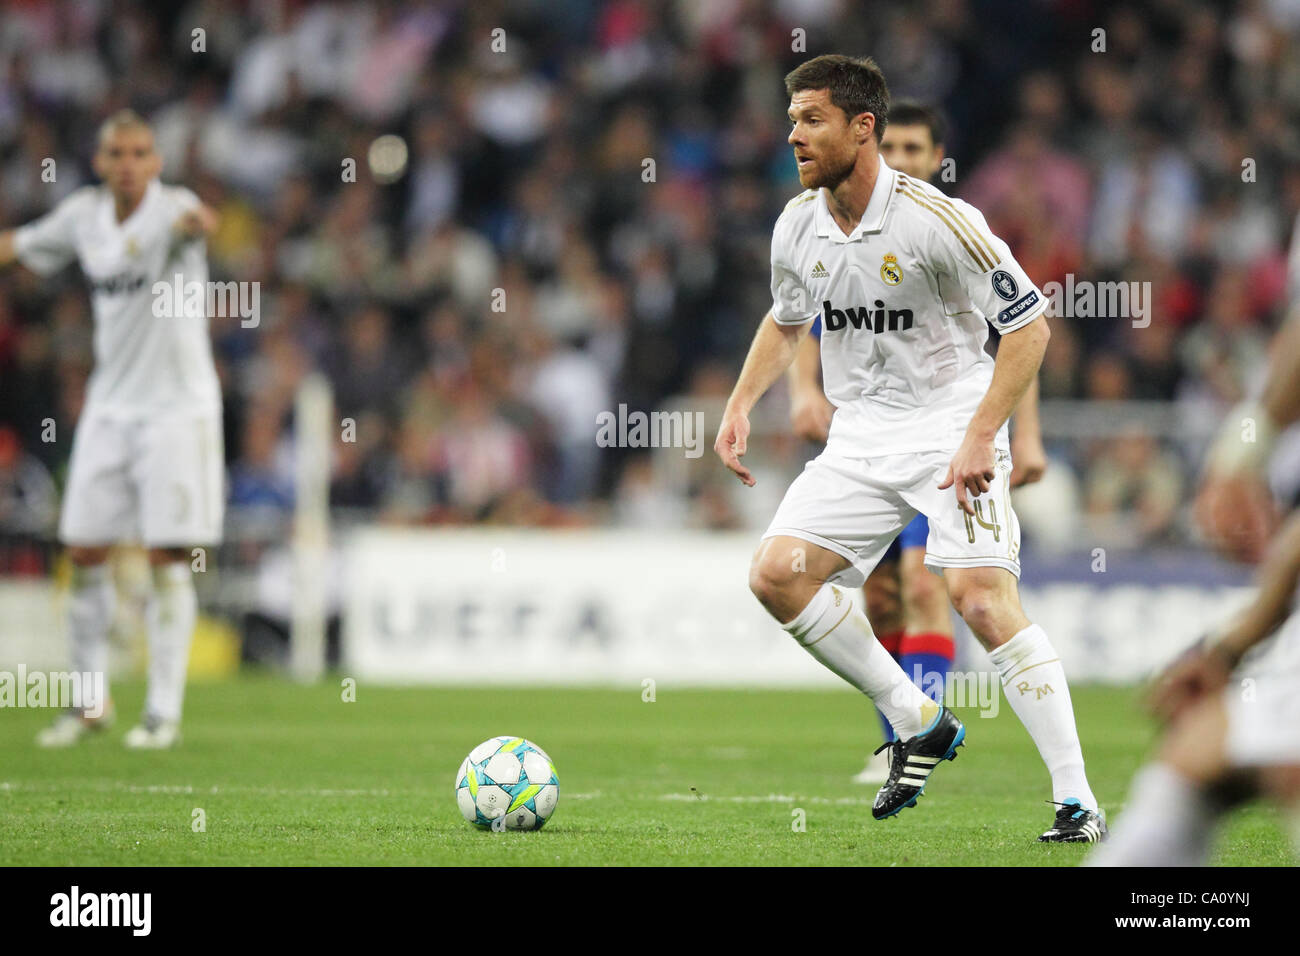 Xabi Alonso (Real),  MARCH 14, 2012 - Football / Soccer : UEFA Champions League Round of 16 2nd leg match between Real Madrid 4-1 CSKA Moscow at Estadio Santiago Bernabeu in Madrid, Spain.  (Photo by AFLO) [2268] Stock Photo